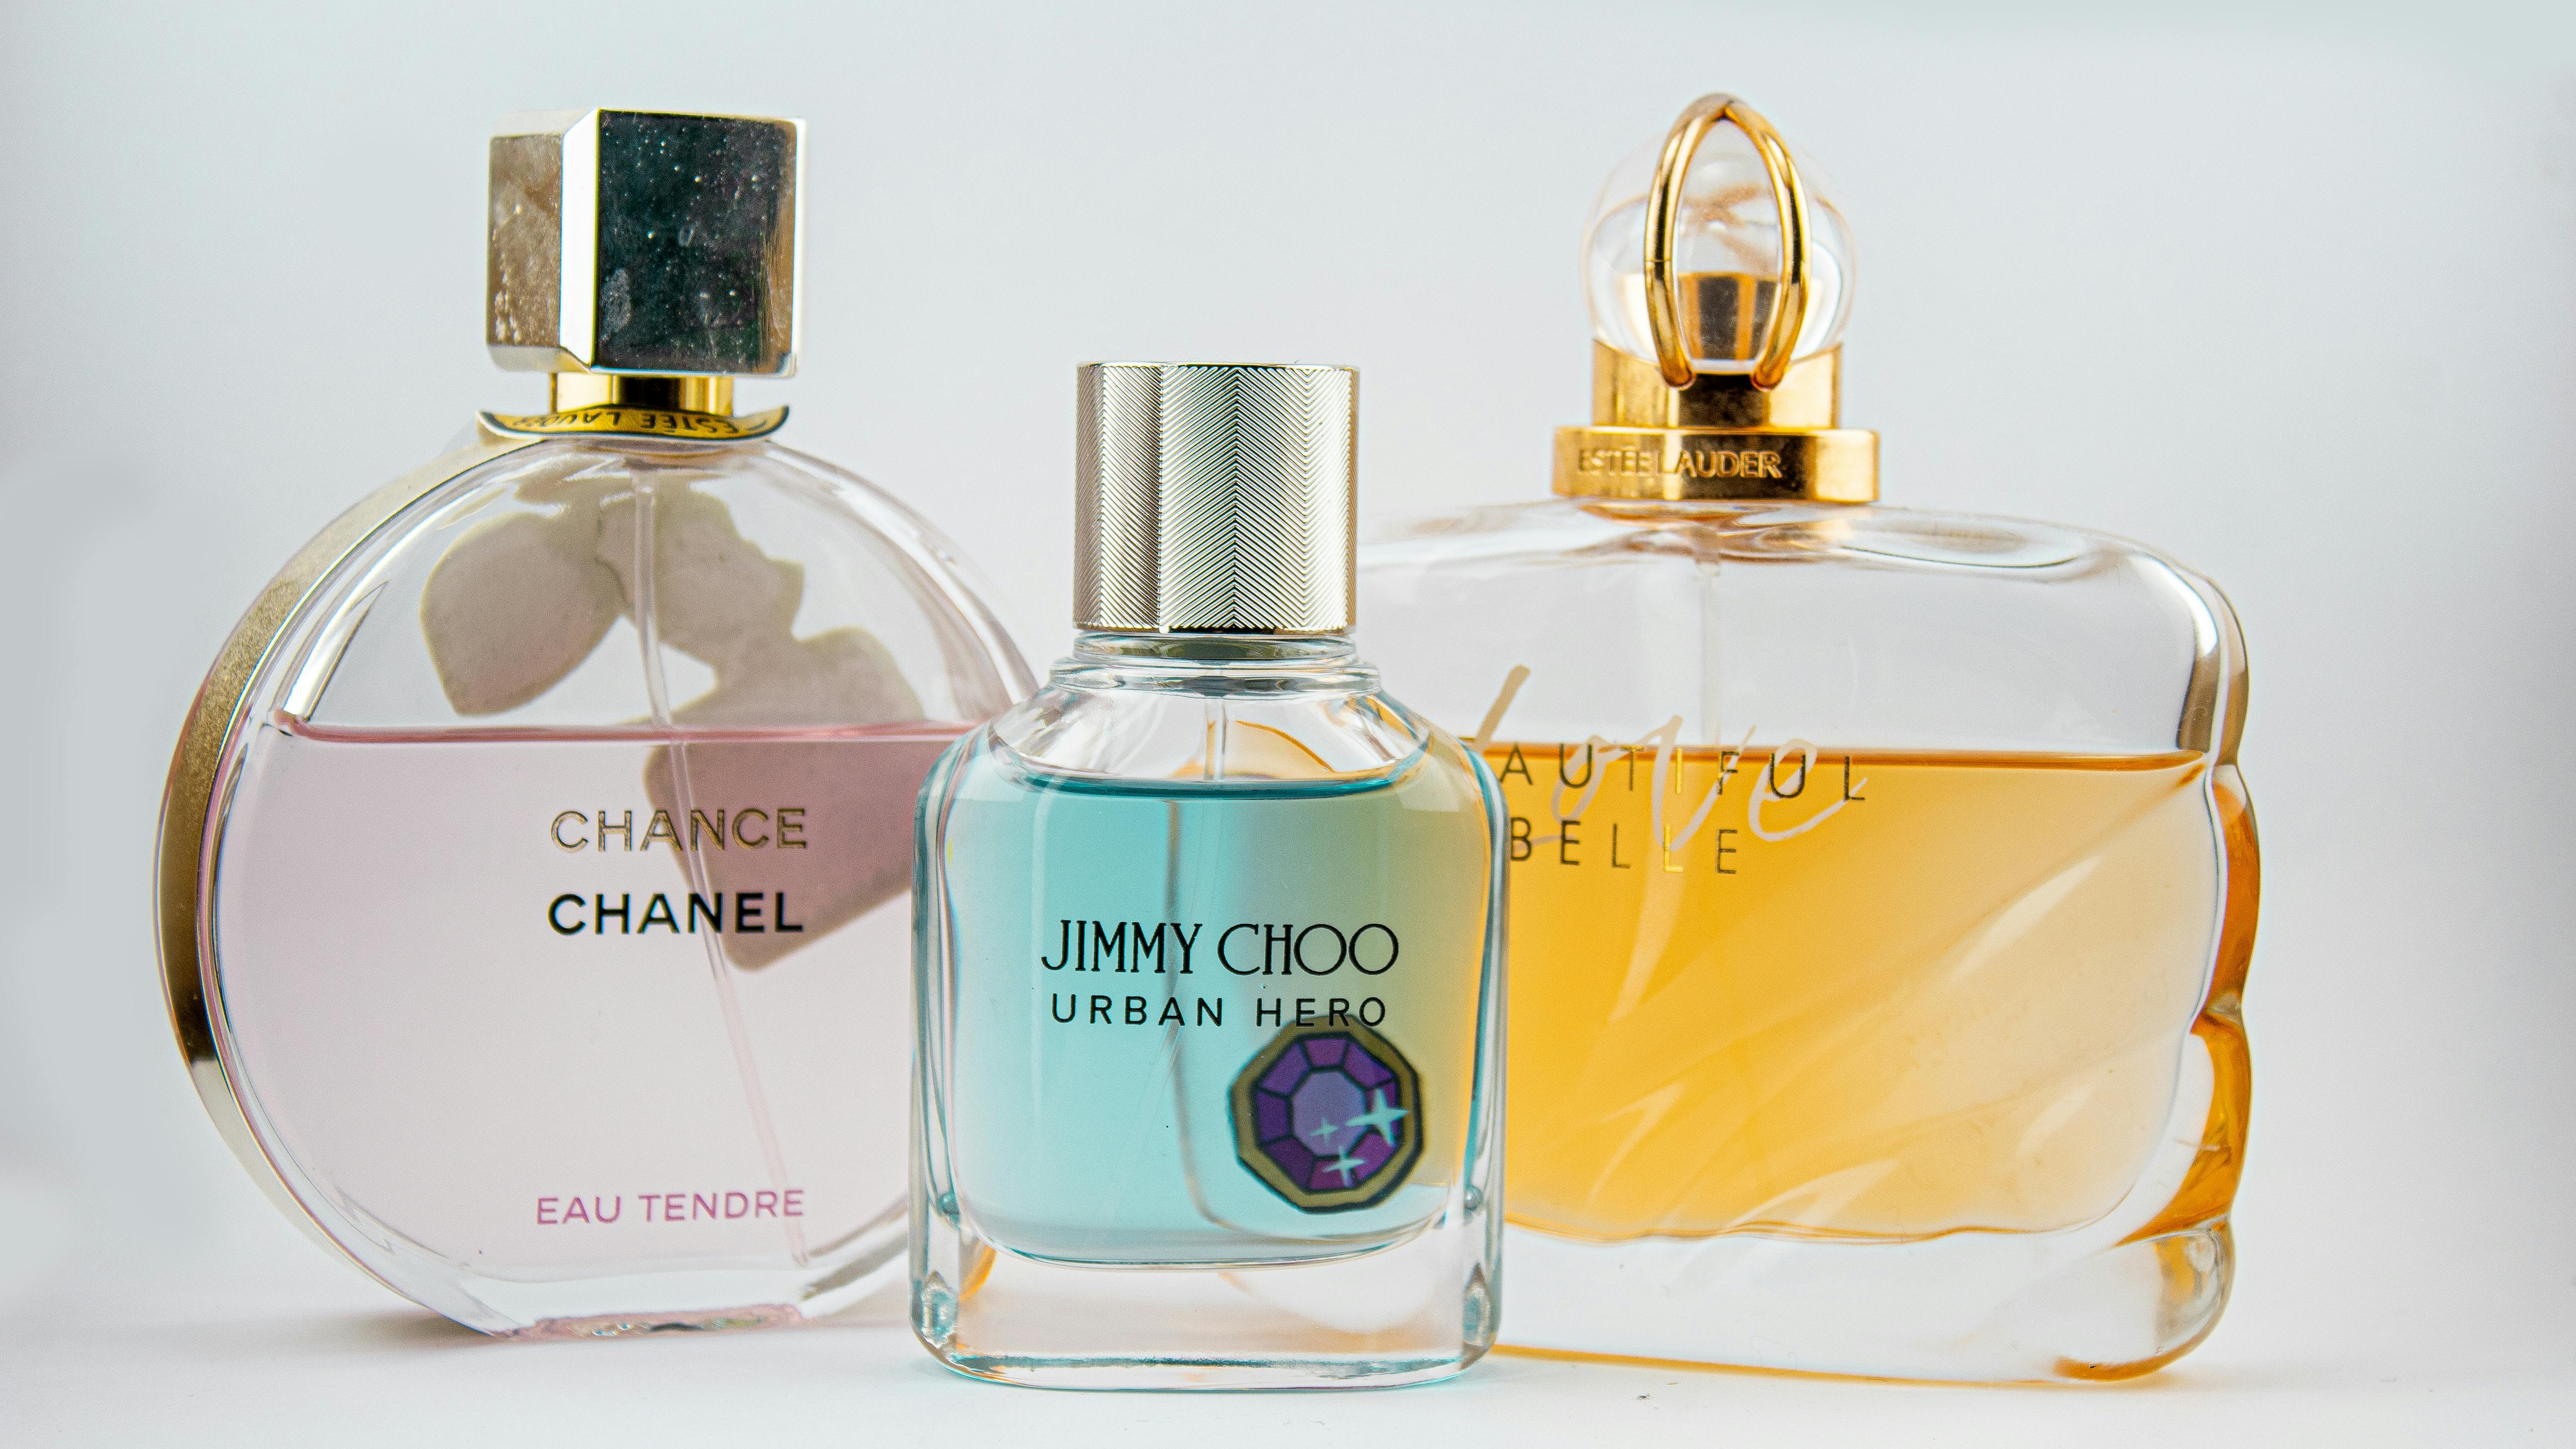 Jimmy Choo perfume and style guide image 1